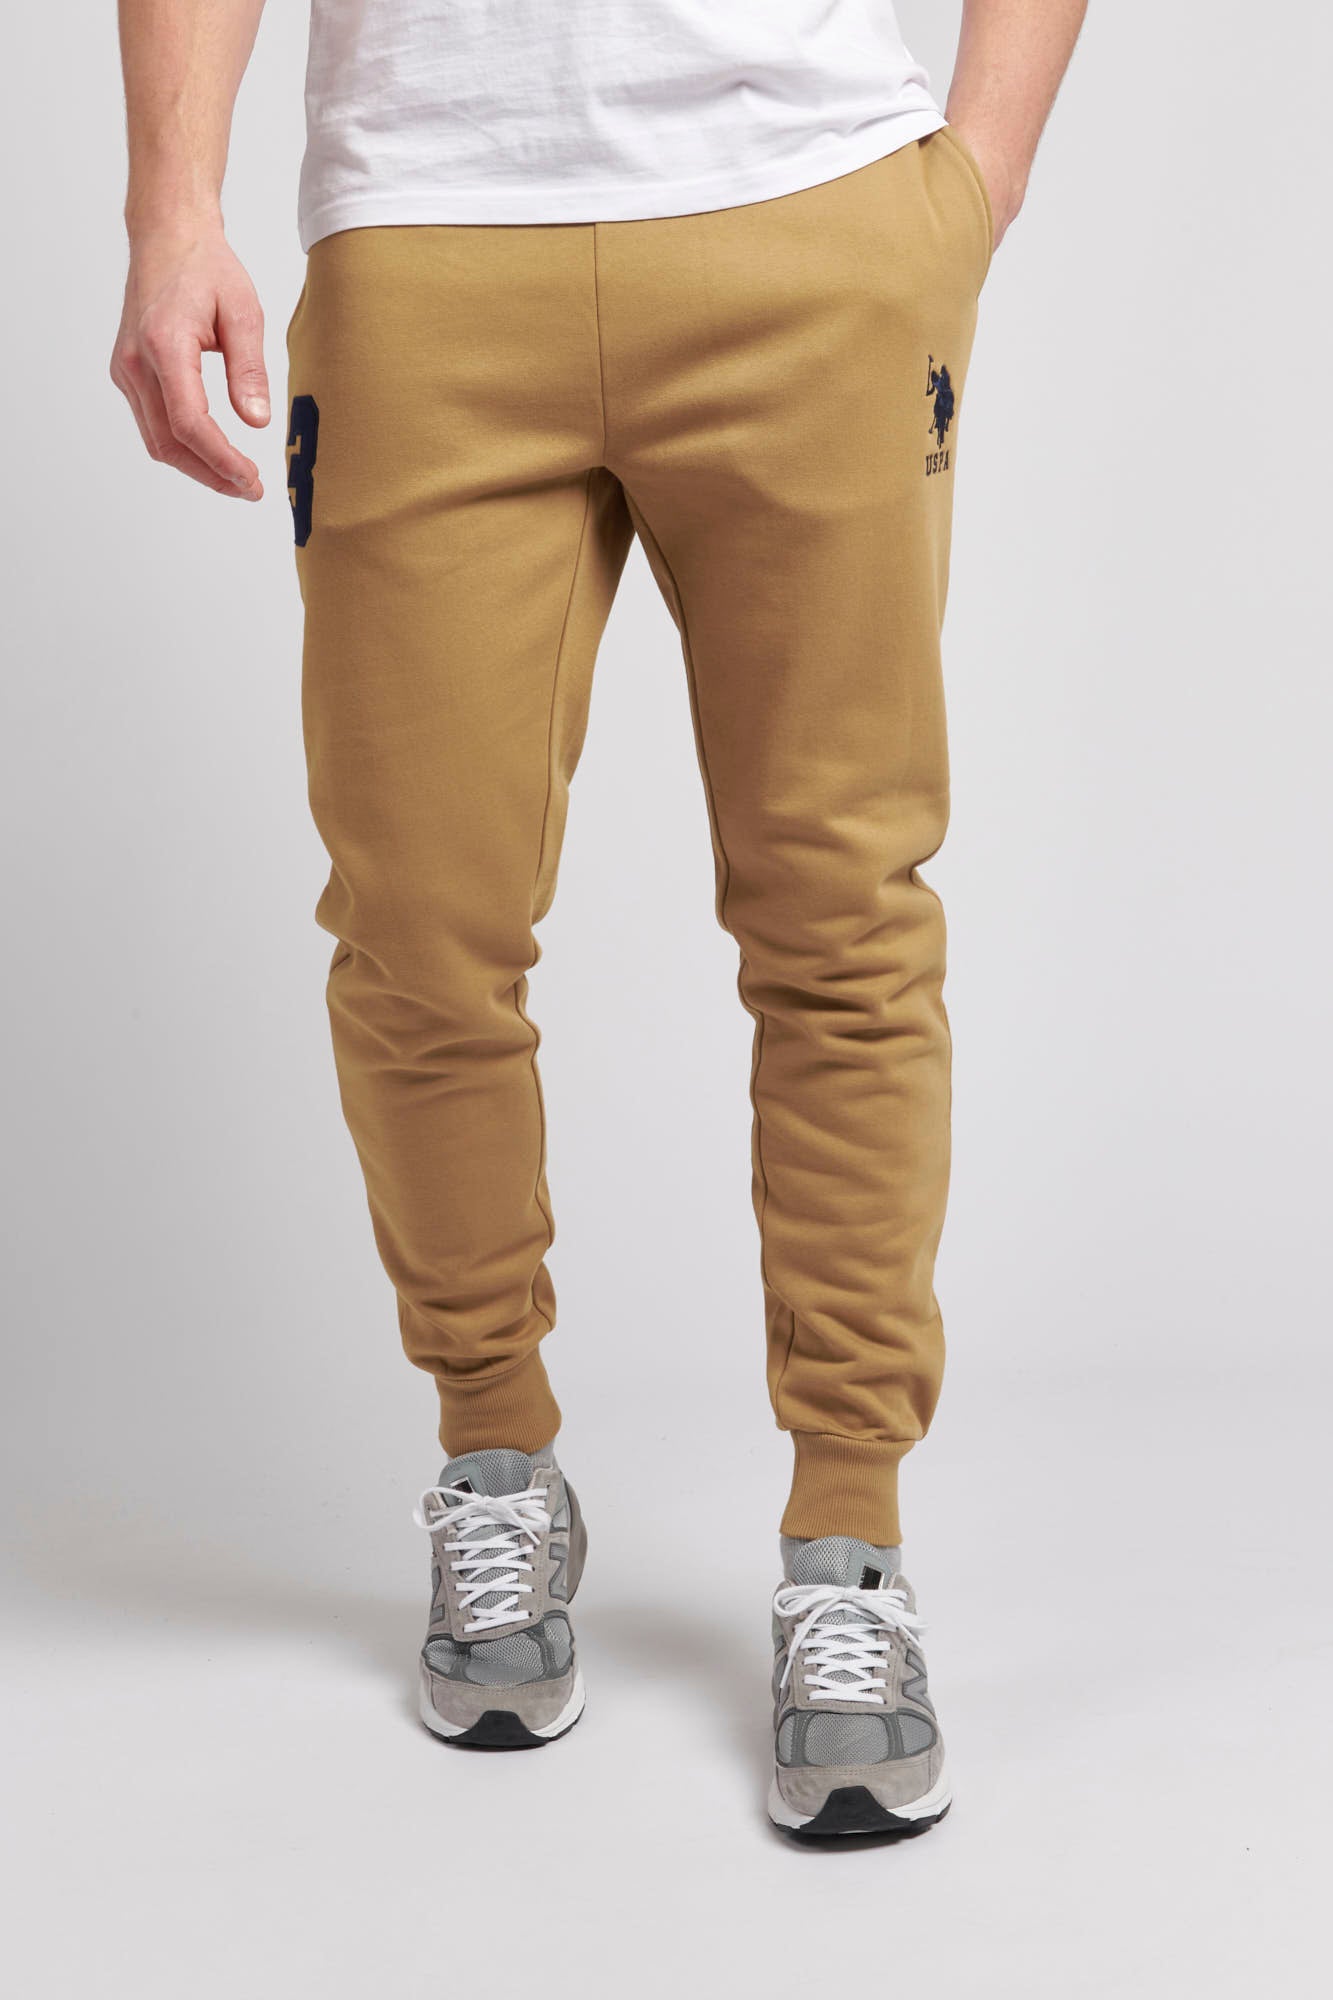 U.S. Polo Assn. Mens Player 3 Joggers in Tigers Eye